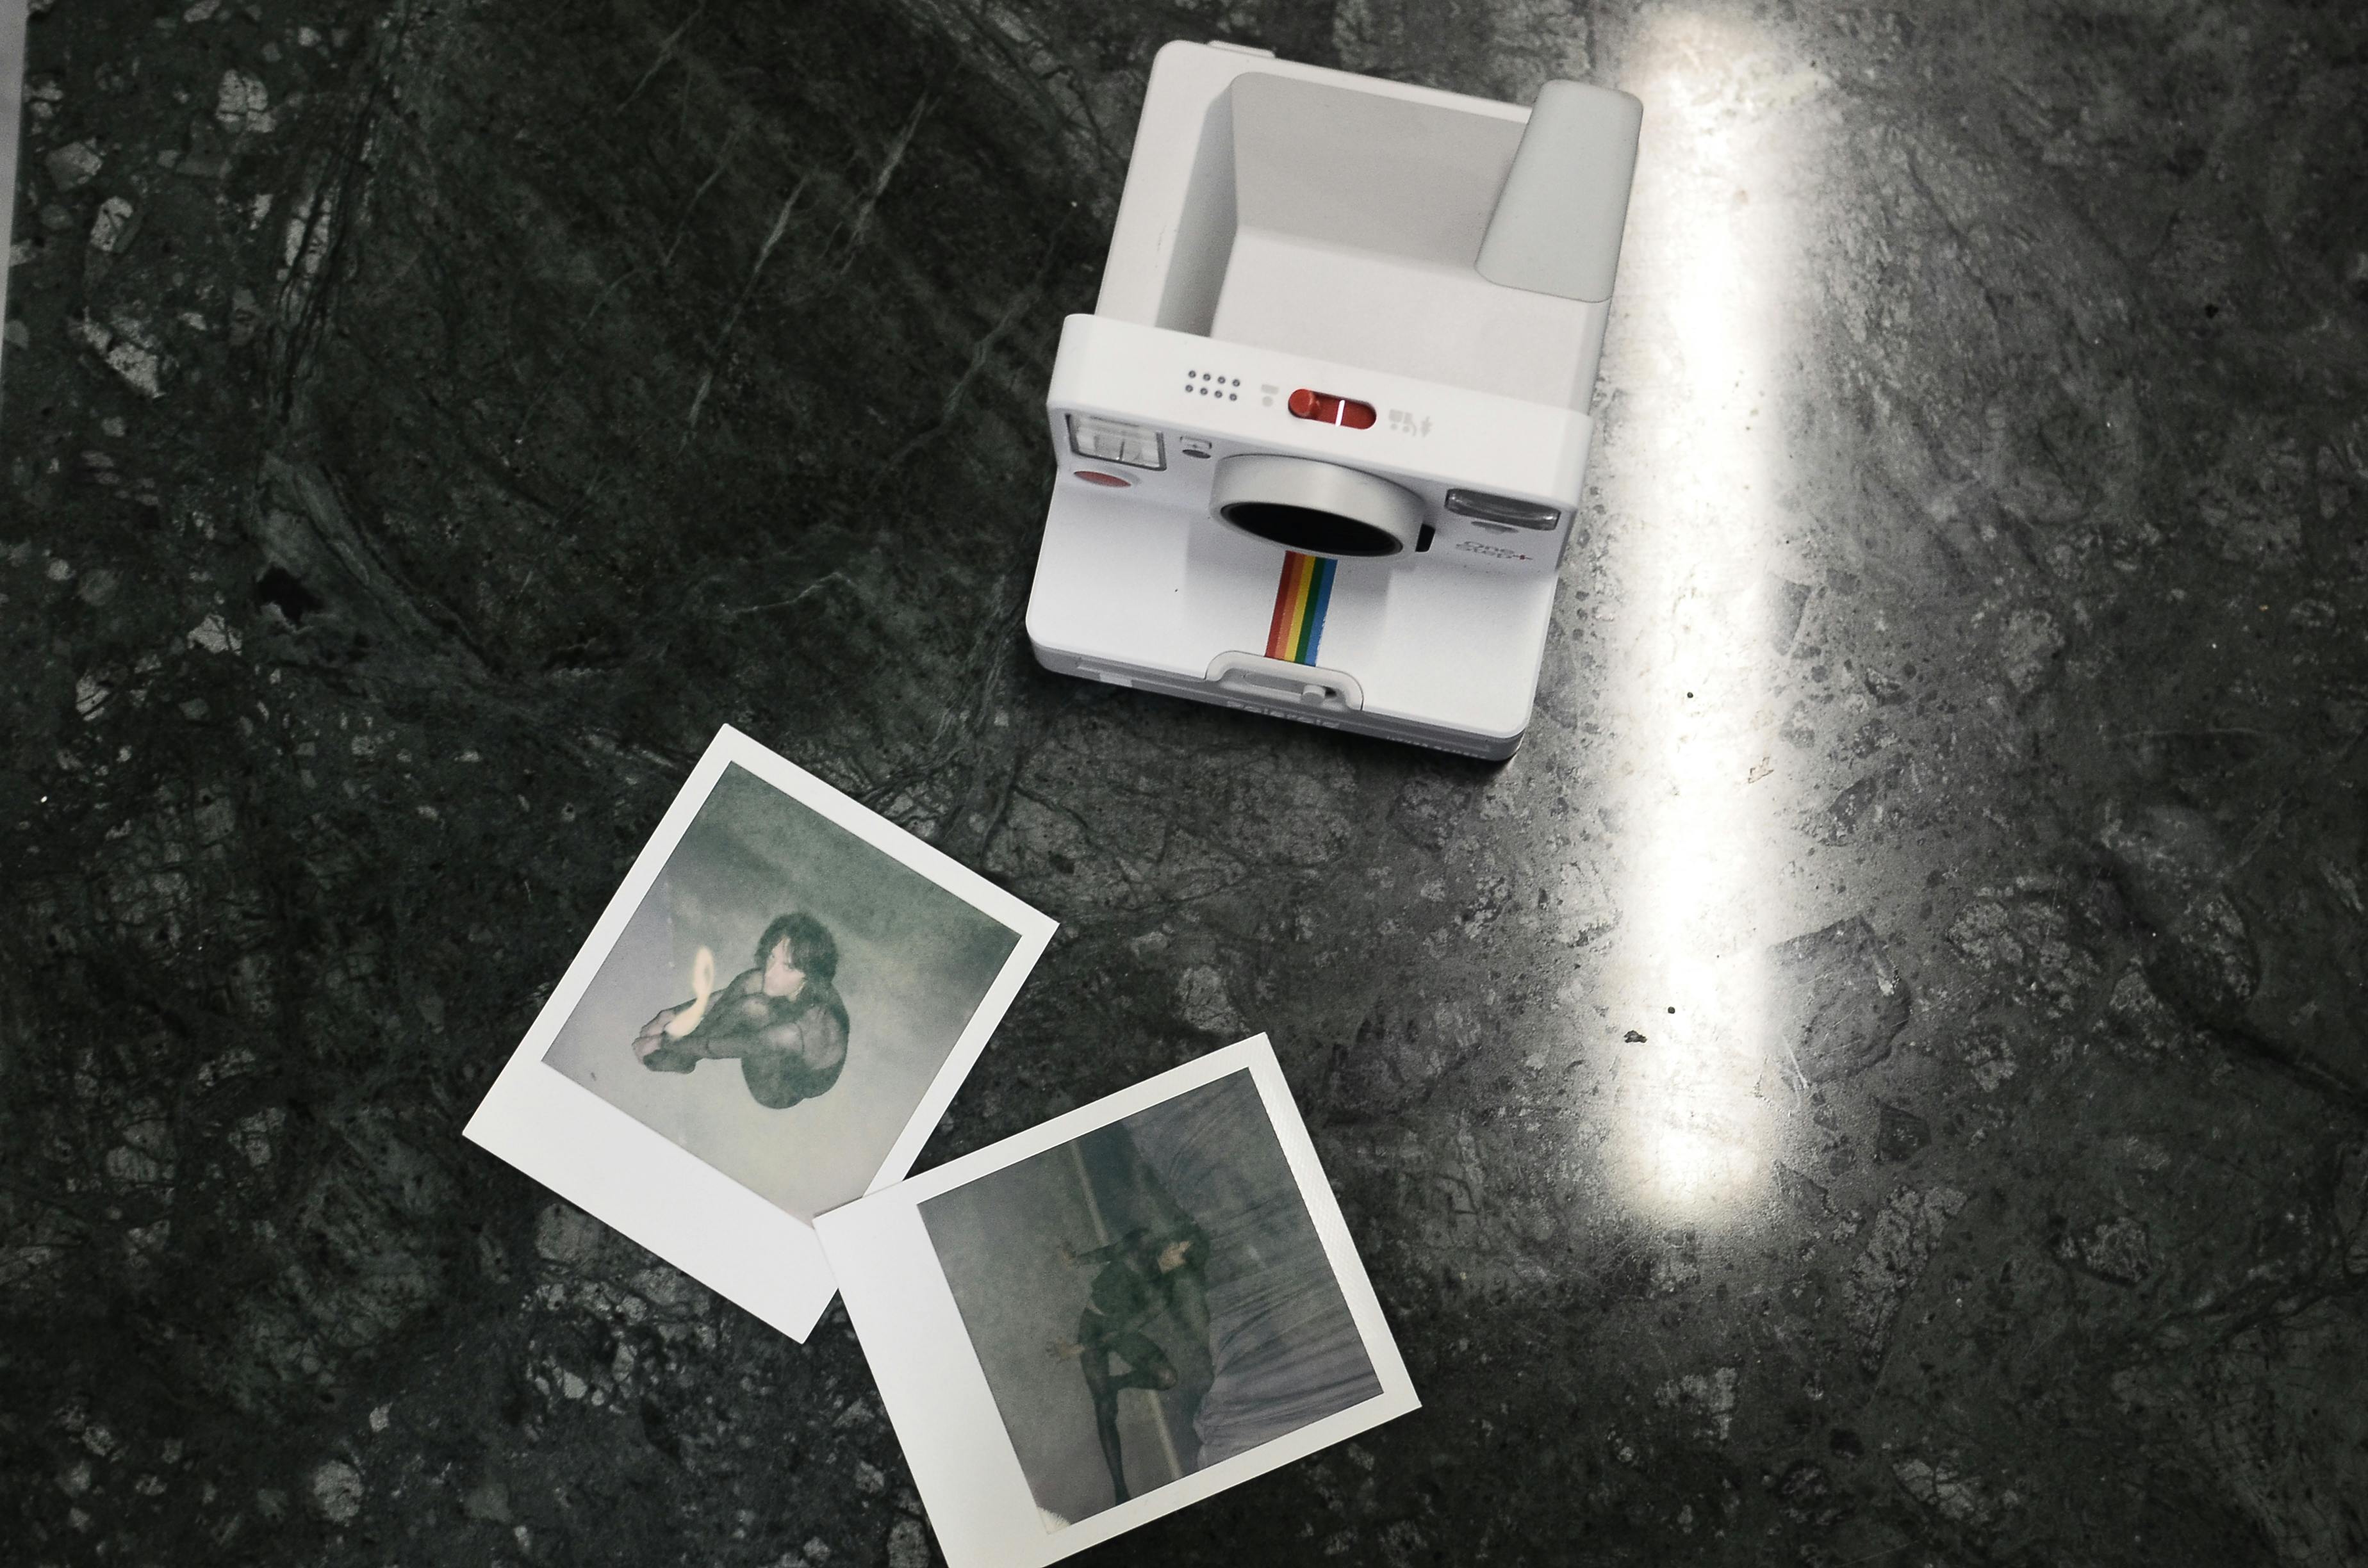 modern instant photo camera and photos placed on marble surface